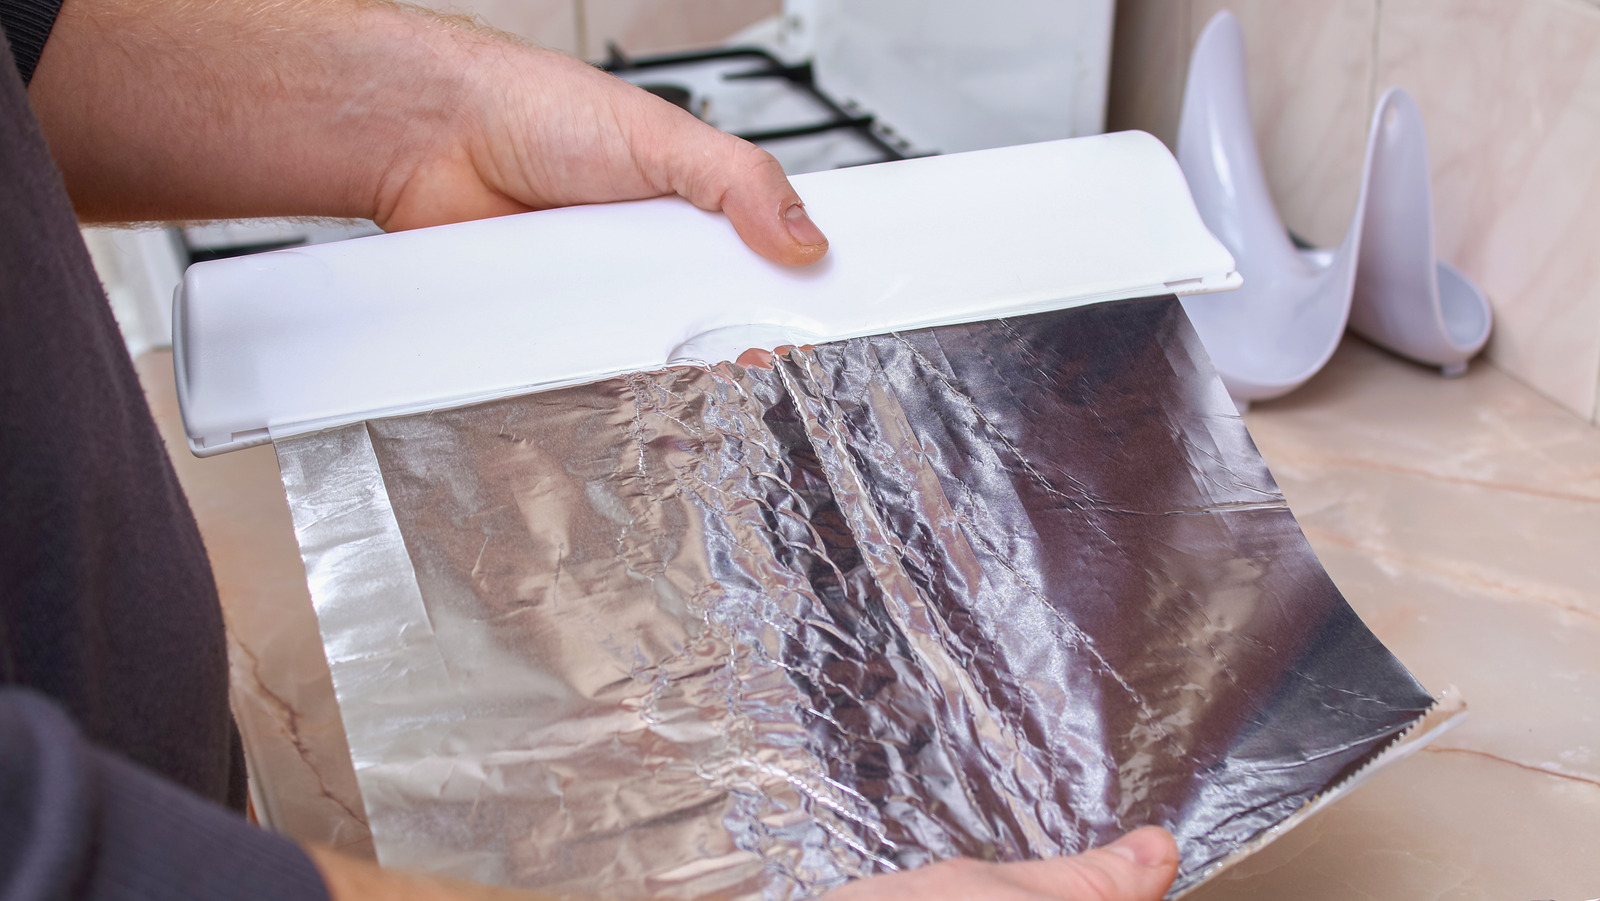 https://www.housedigest.com/img/gallery/keep-the-gap-between-your-stove-and-countertop-clean-with-this-aluminum-foil-hack/l-intro-1697557255.jpg